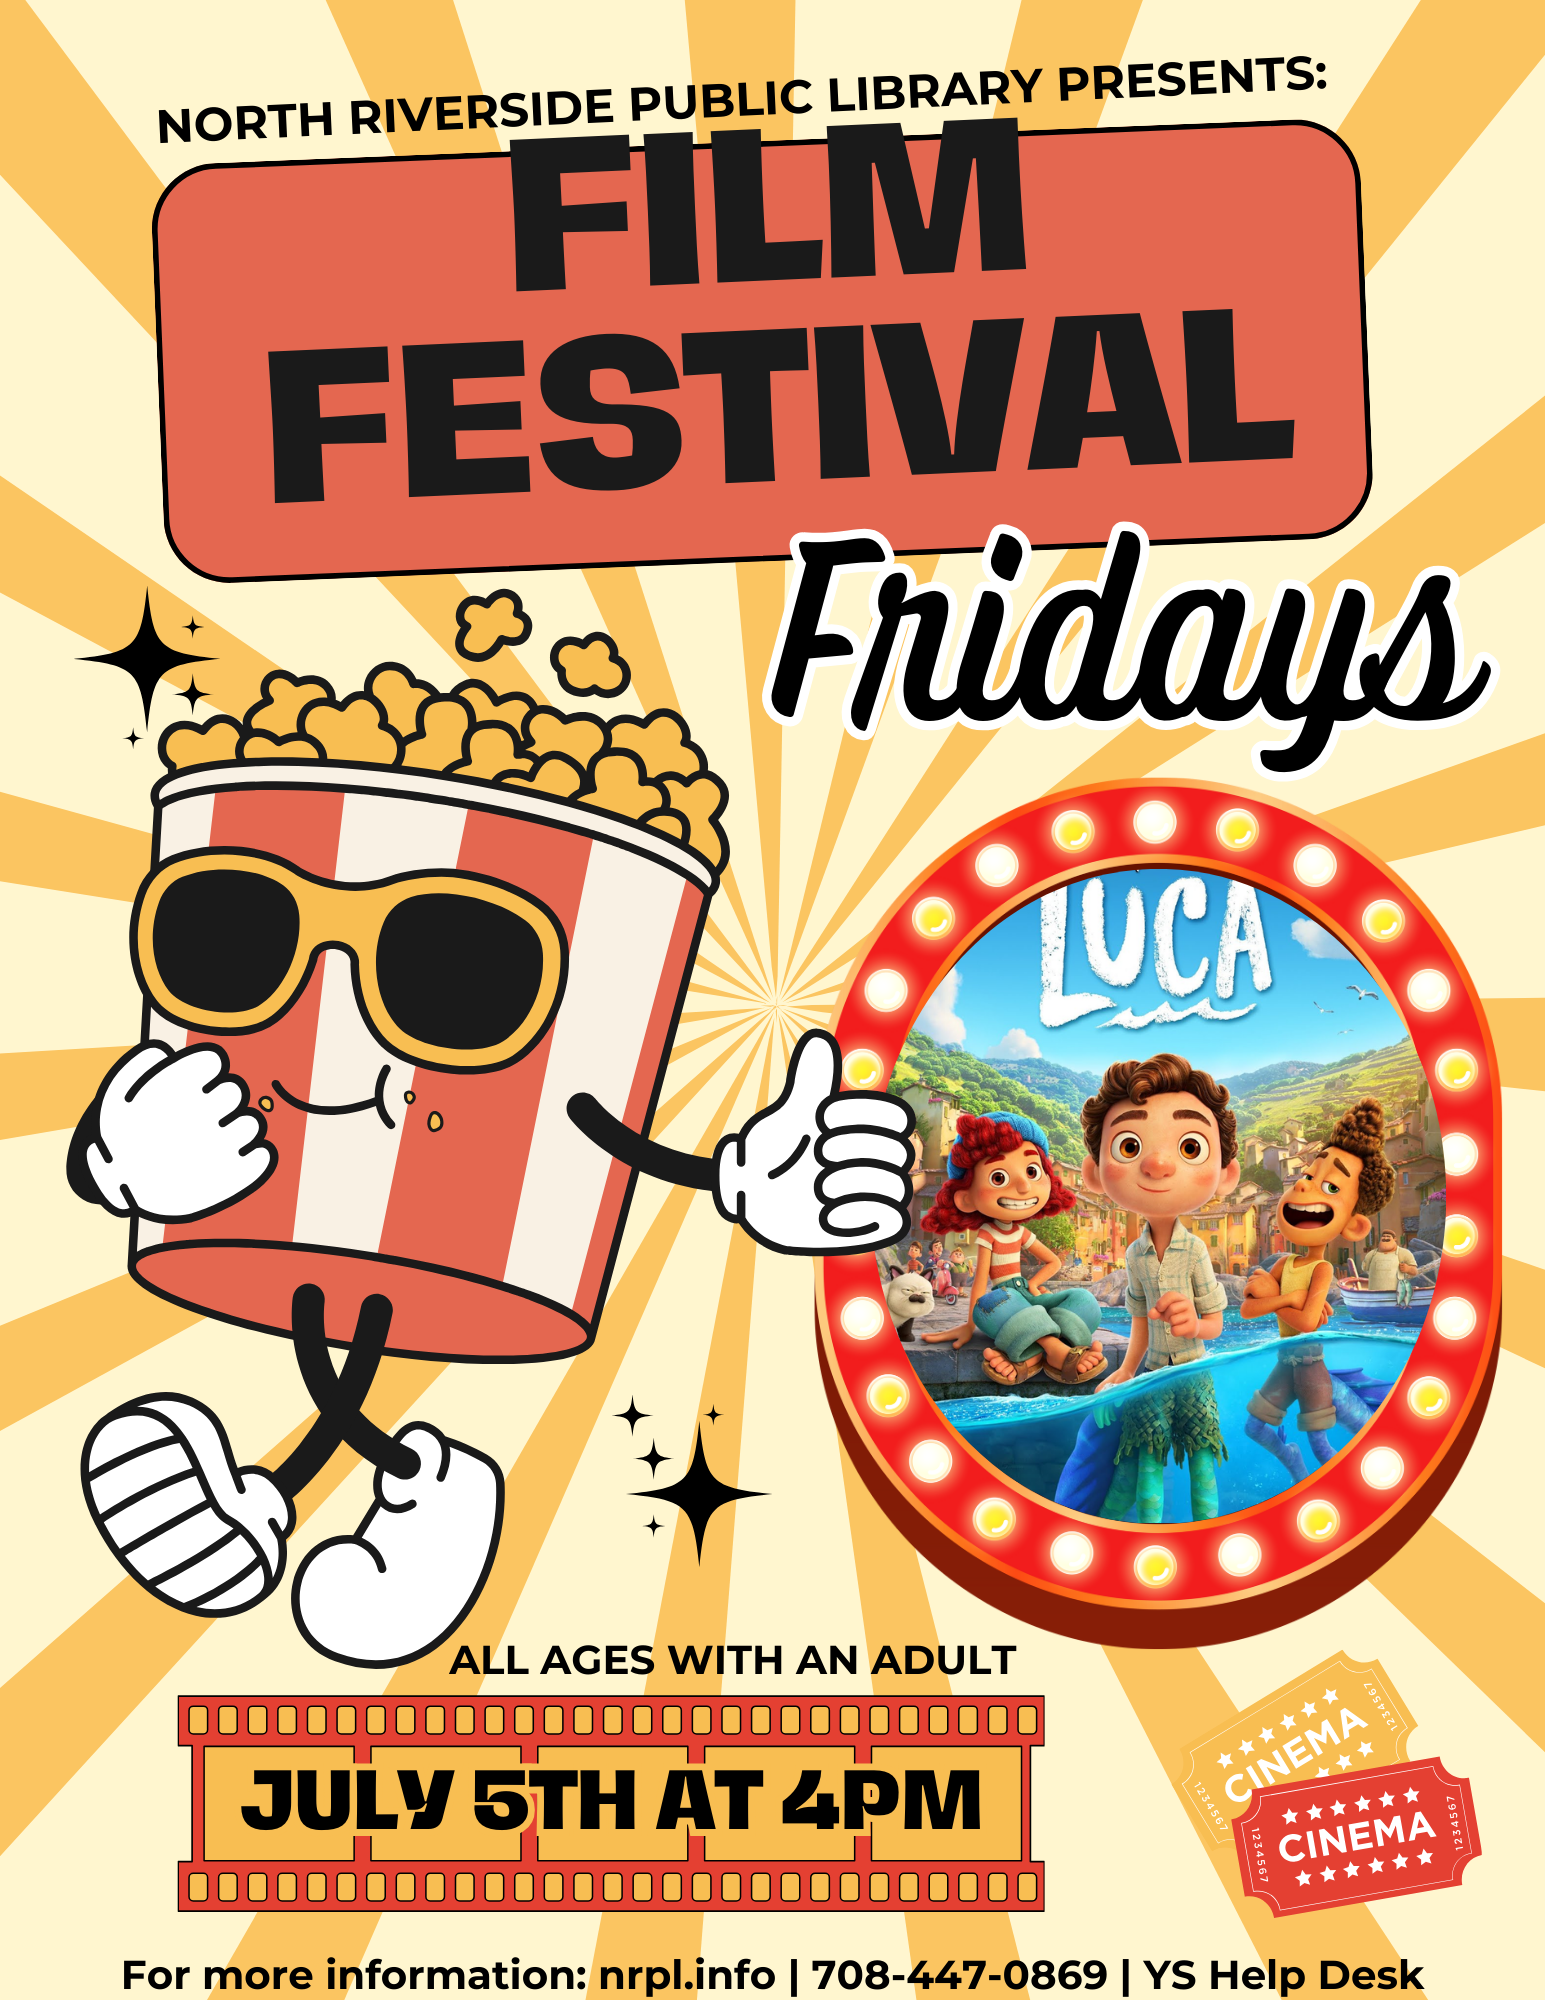 Film Festival Fridays. First Friday of the month at 4pm. July 5: Luca (2021). August 2: Elemental (2023). Children of all ages with an adult. No registration required.